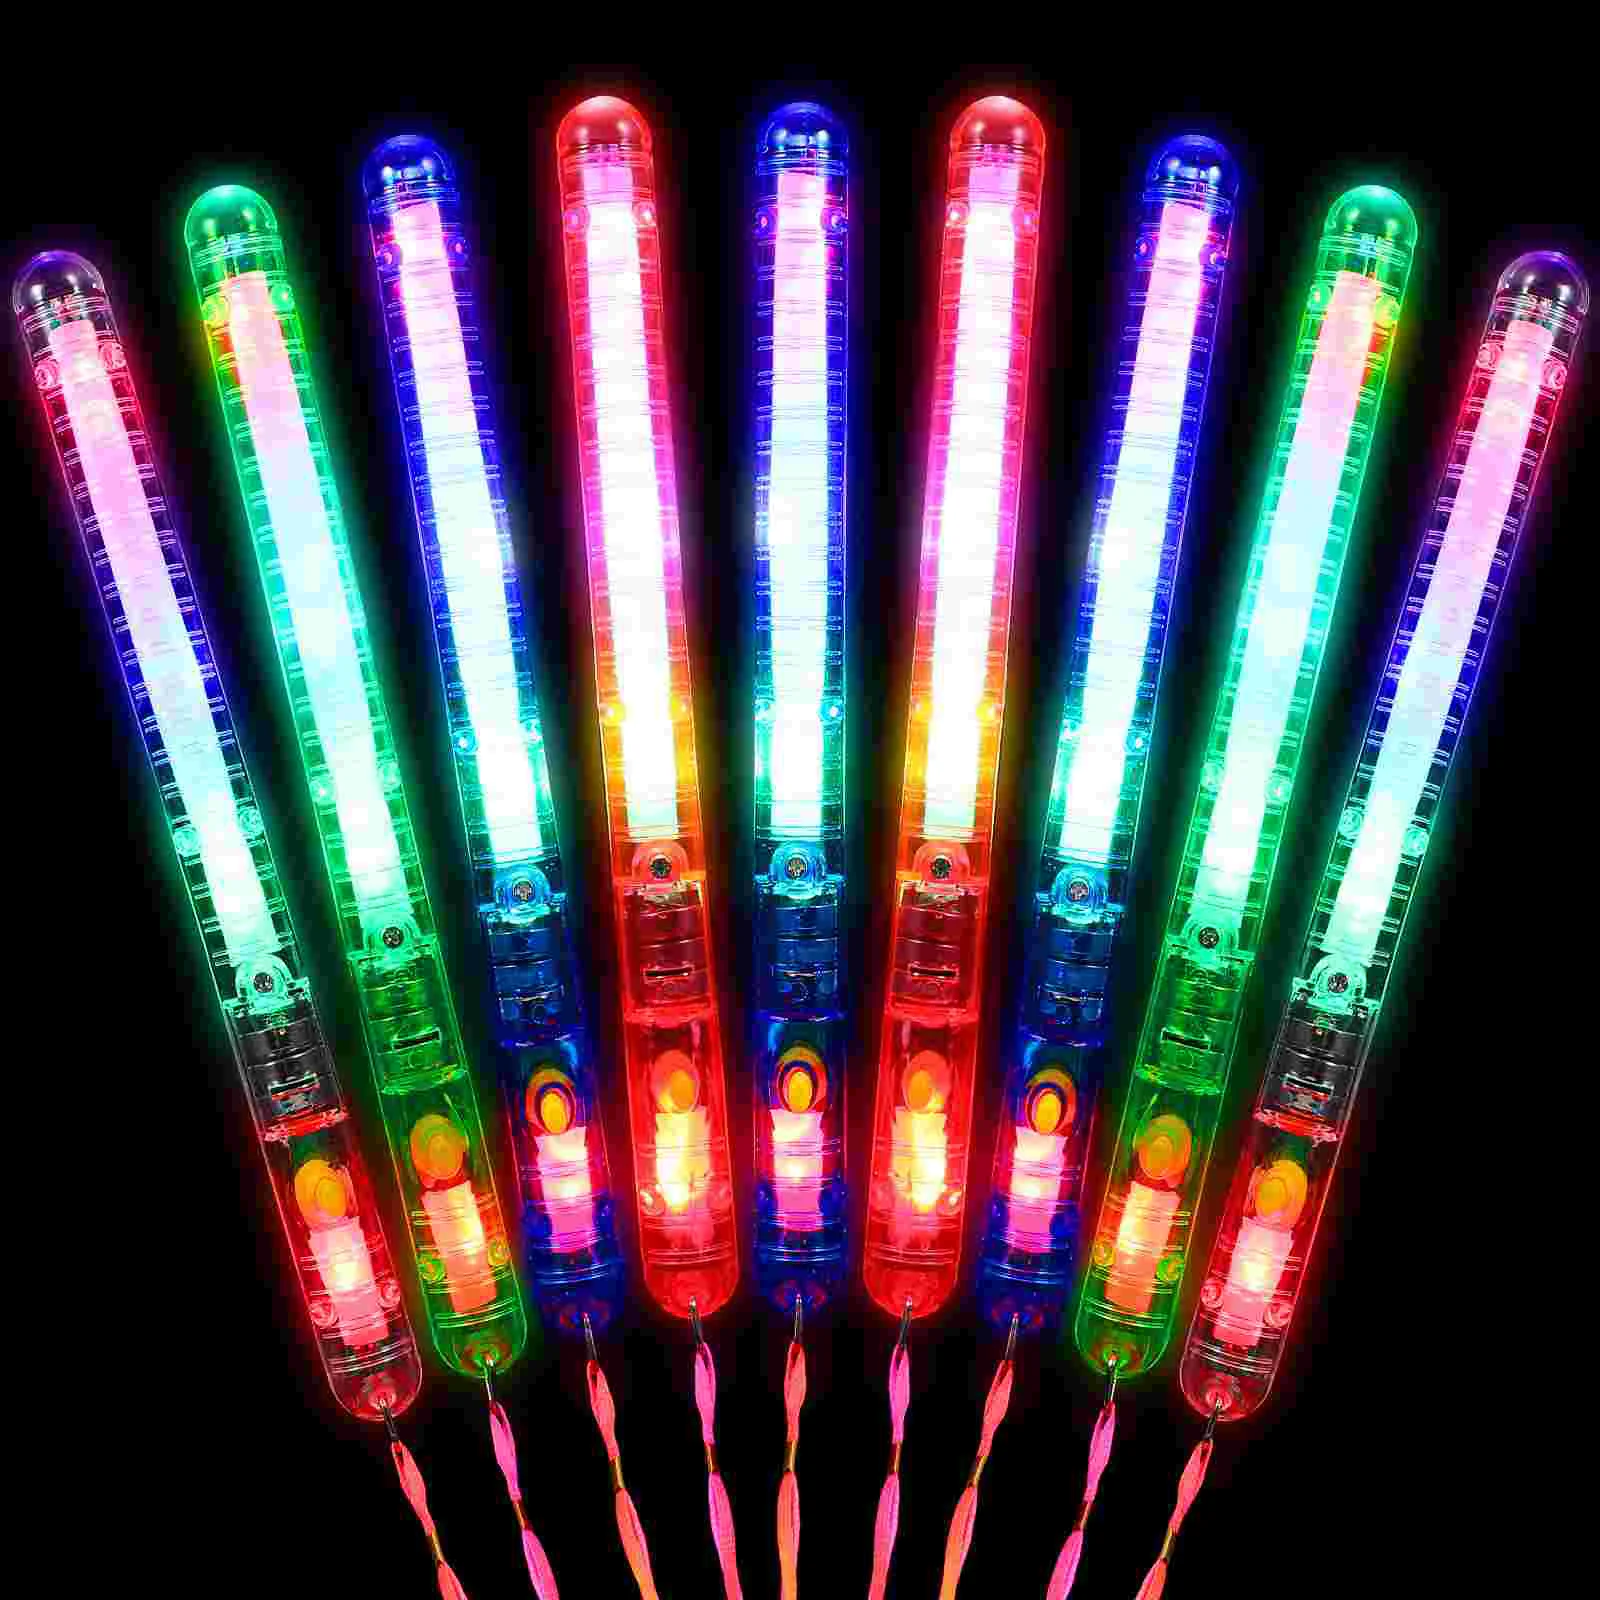 

12 Pcs Flashing LED Wand Sticks with Lanyards Light up Wands Glowing Multicolor Wands for Music Concert Party Favor